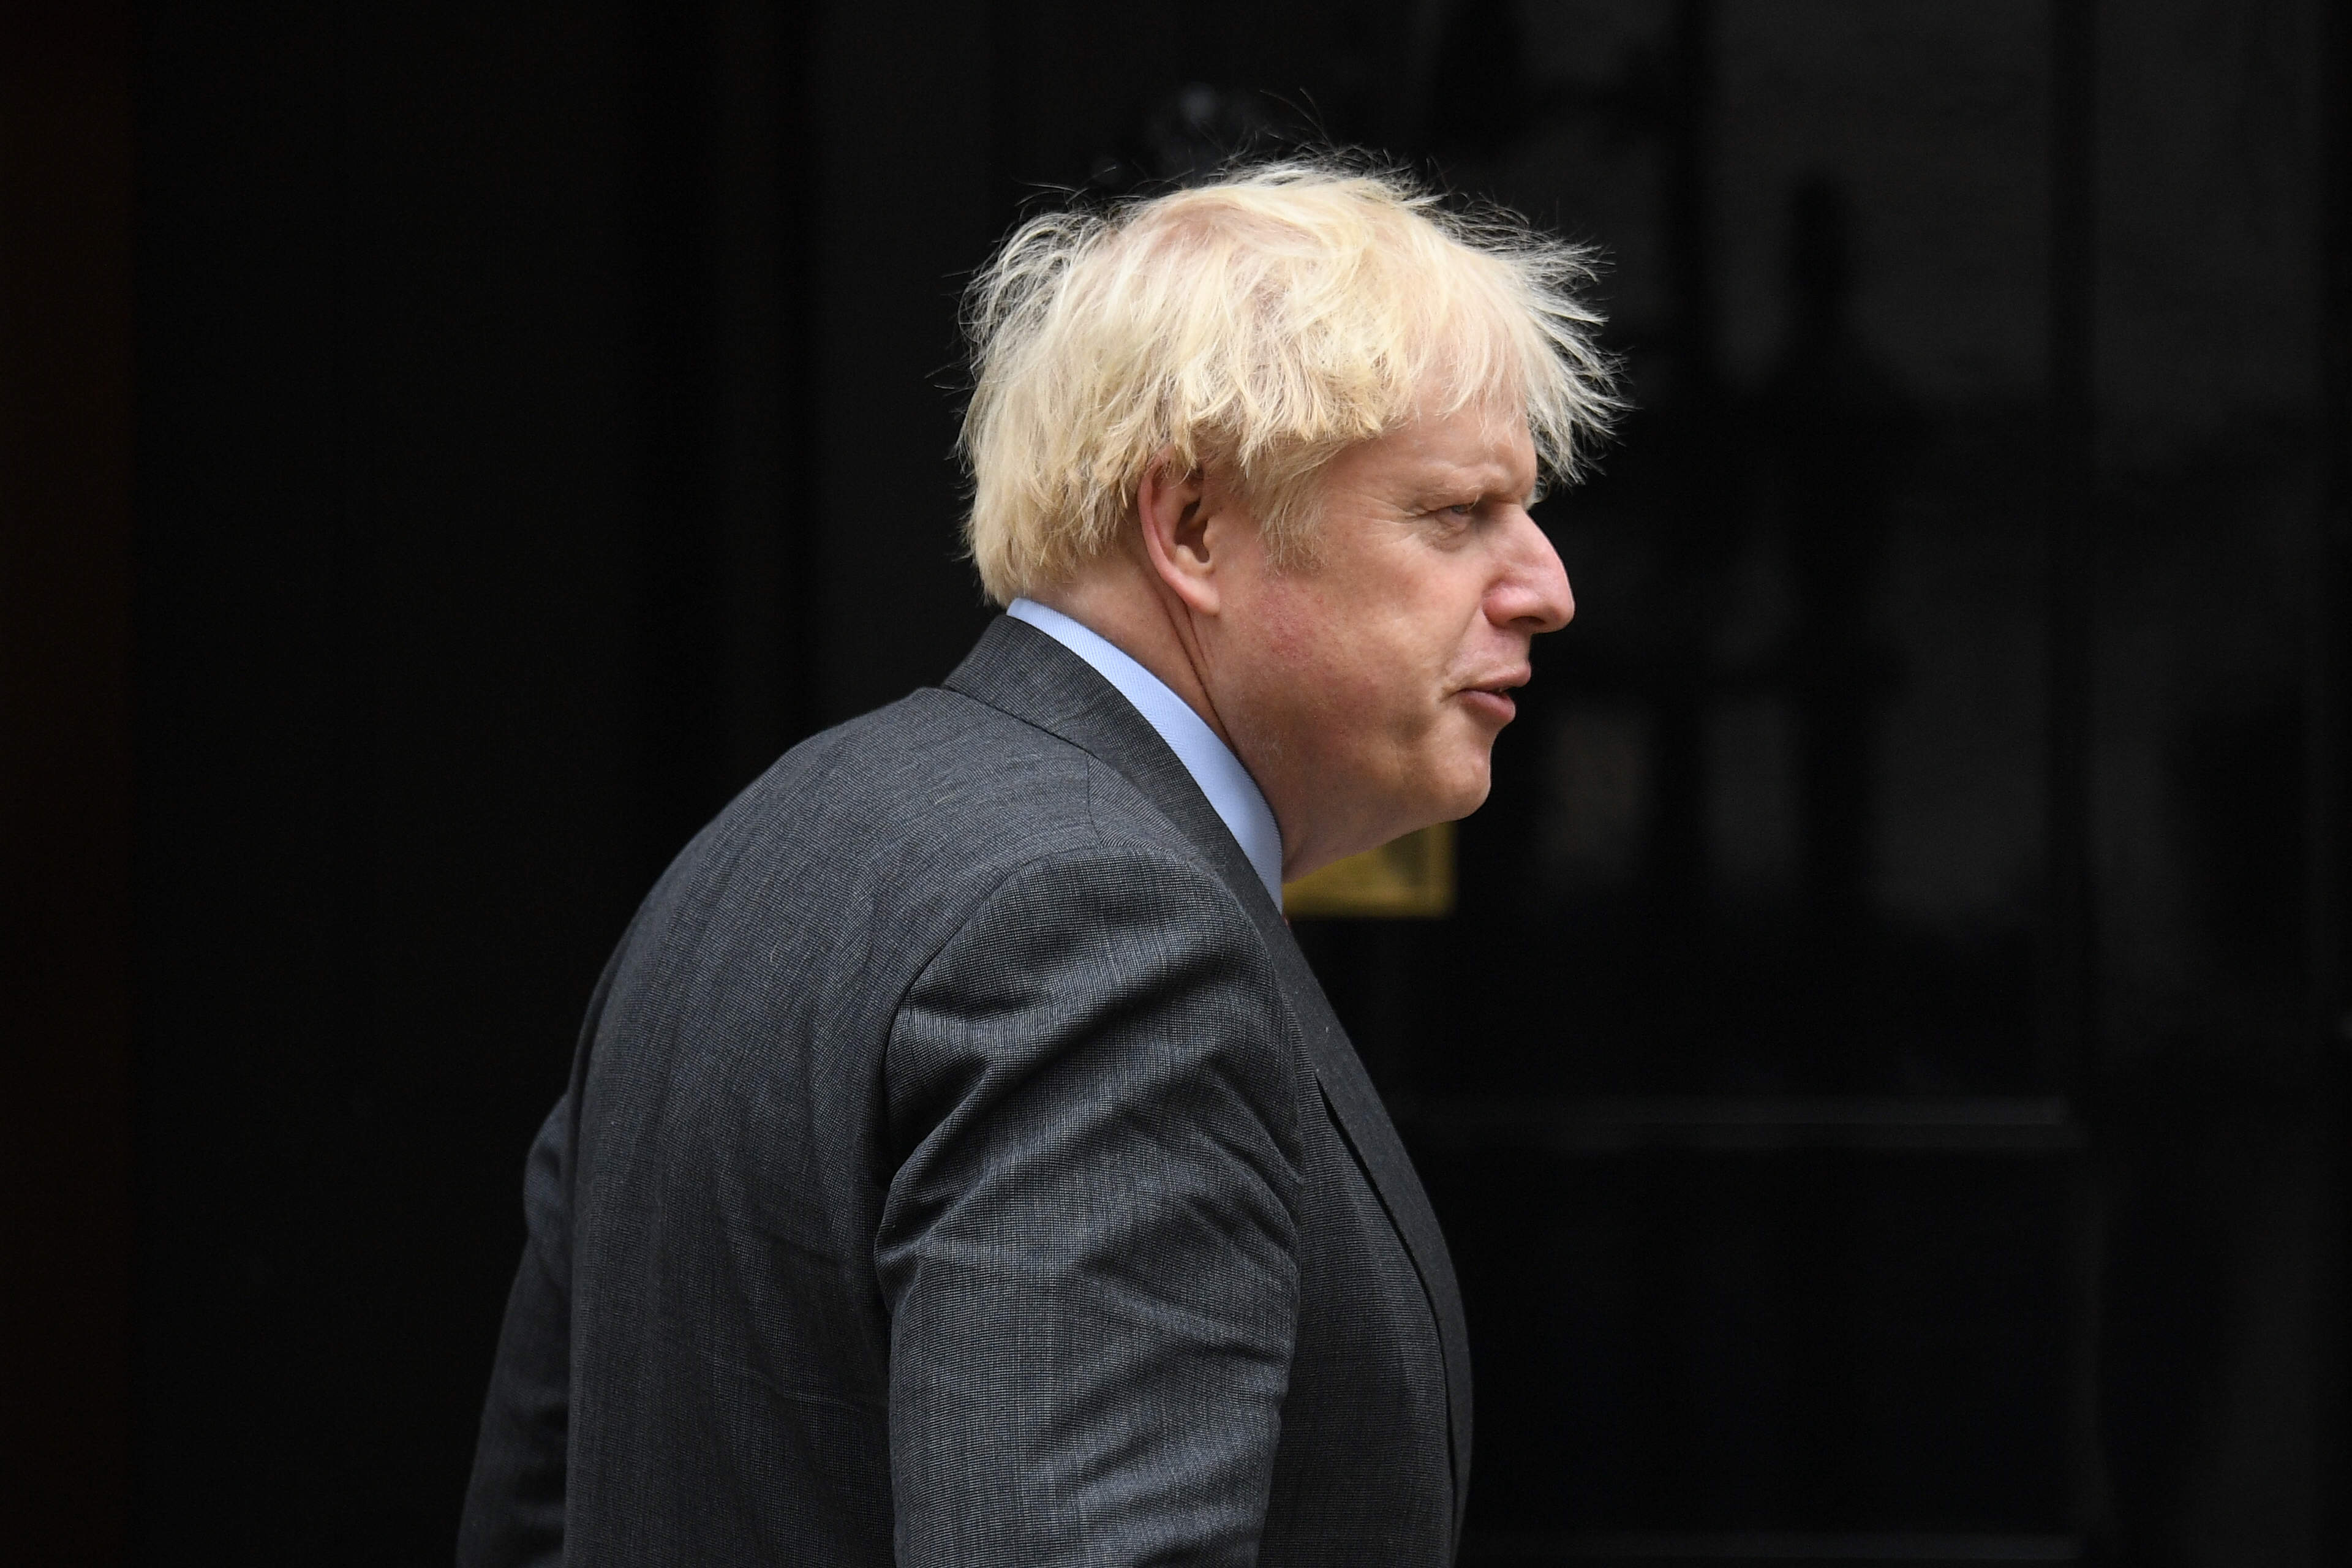 Prime Minister, Boris Johnson enters 10 Downing Street on Sept. 30 in London, England. (Leon Neal/Getty Images)